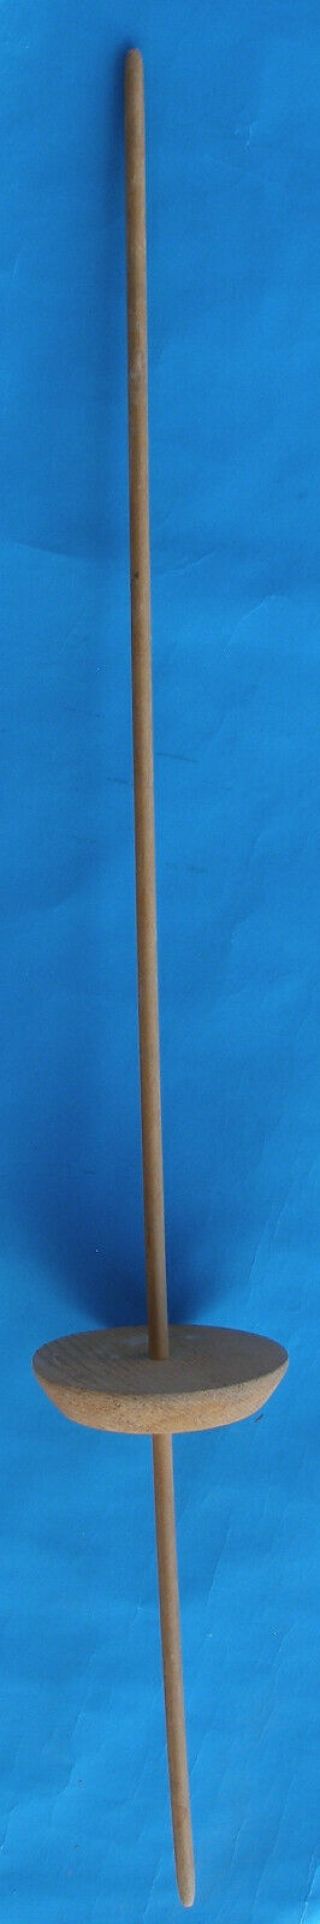 Navajo Spindle For Spinning Wool.